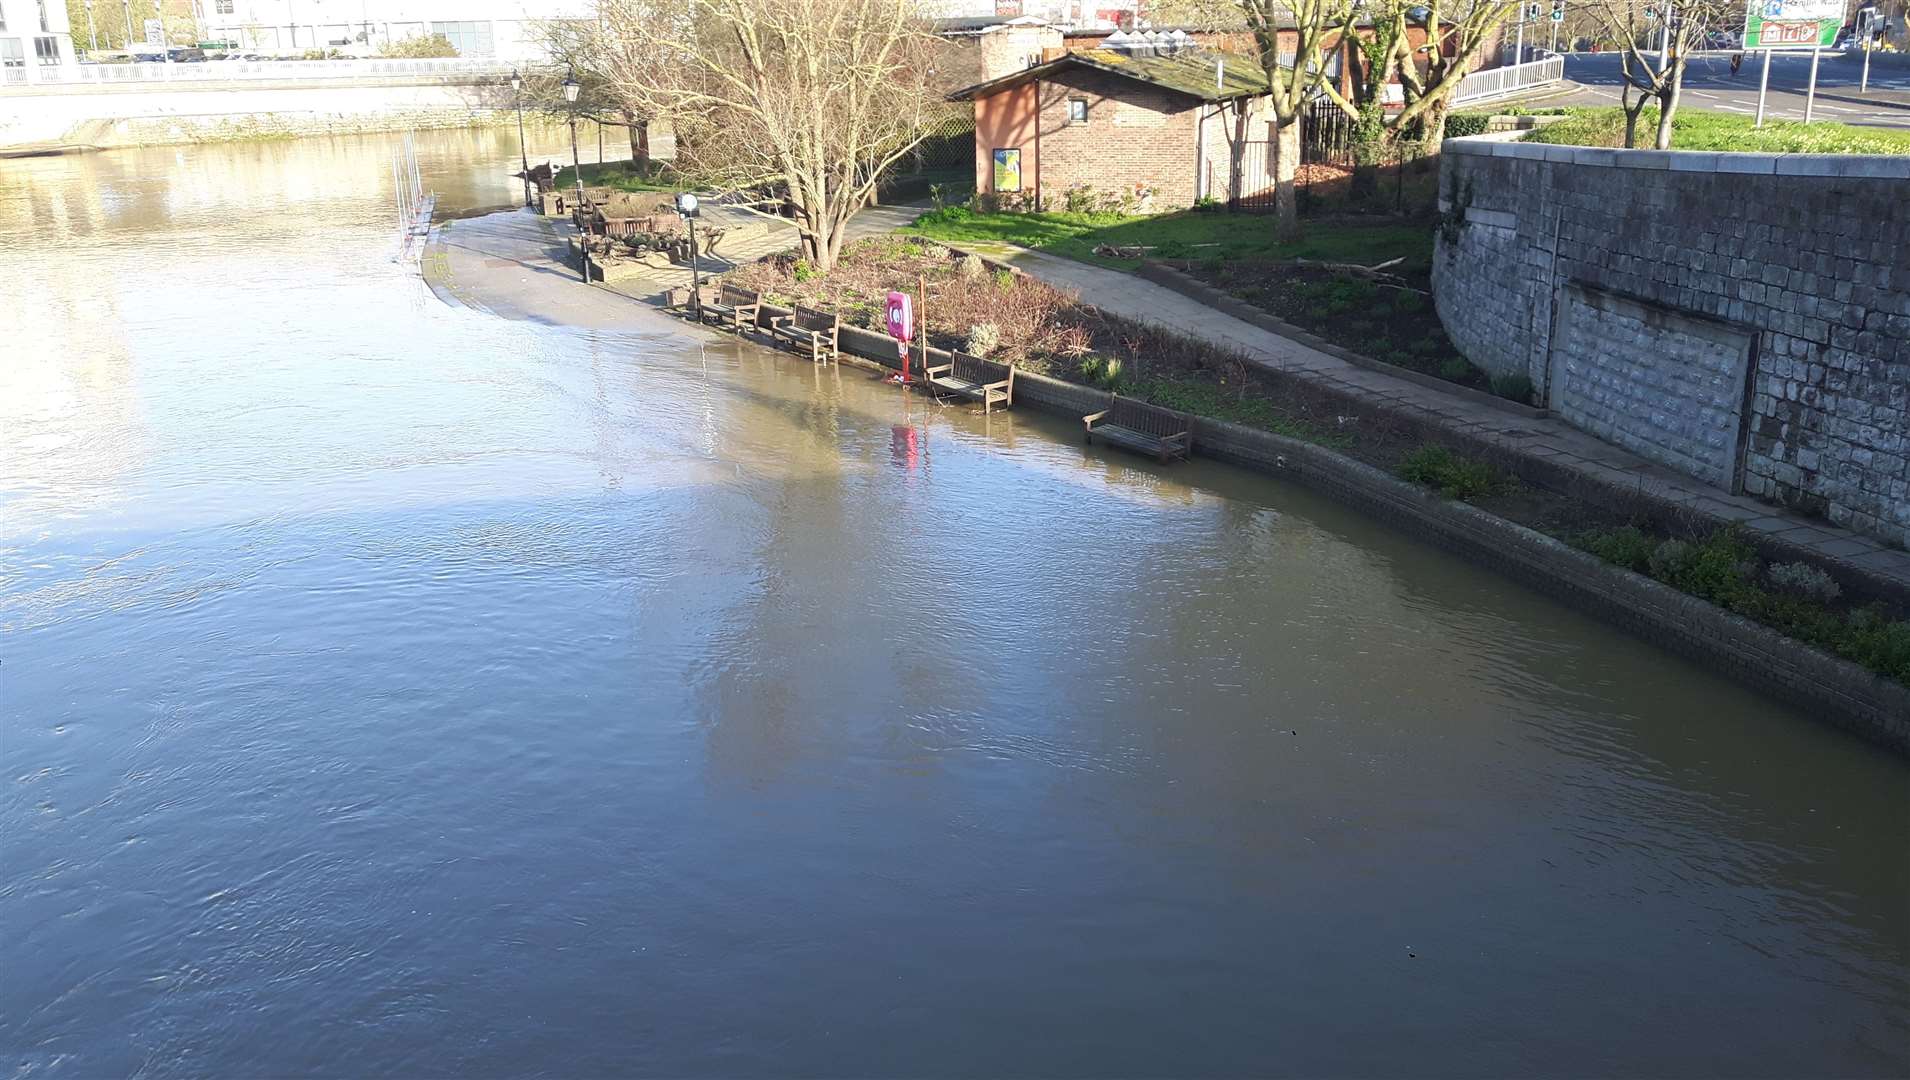 Flooding on the River Medway